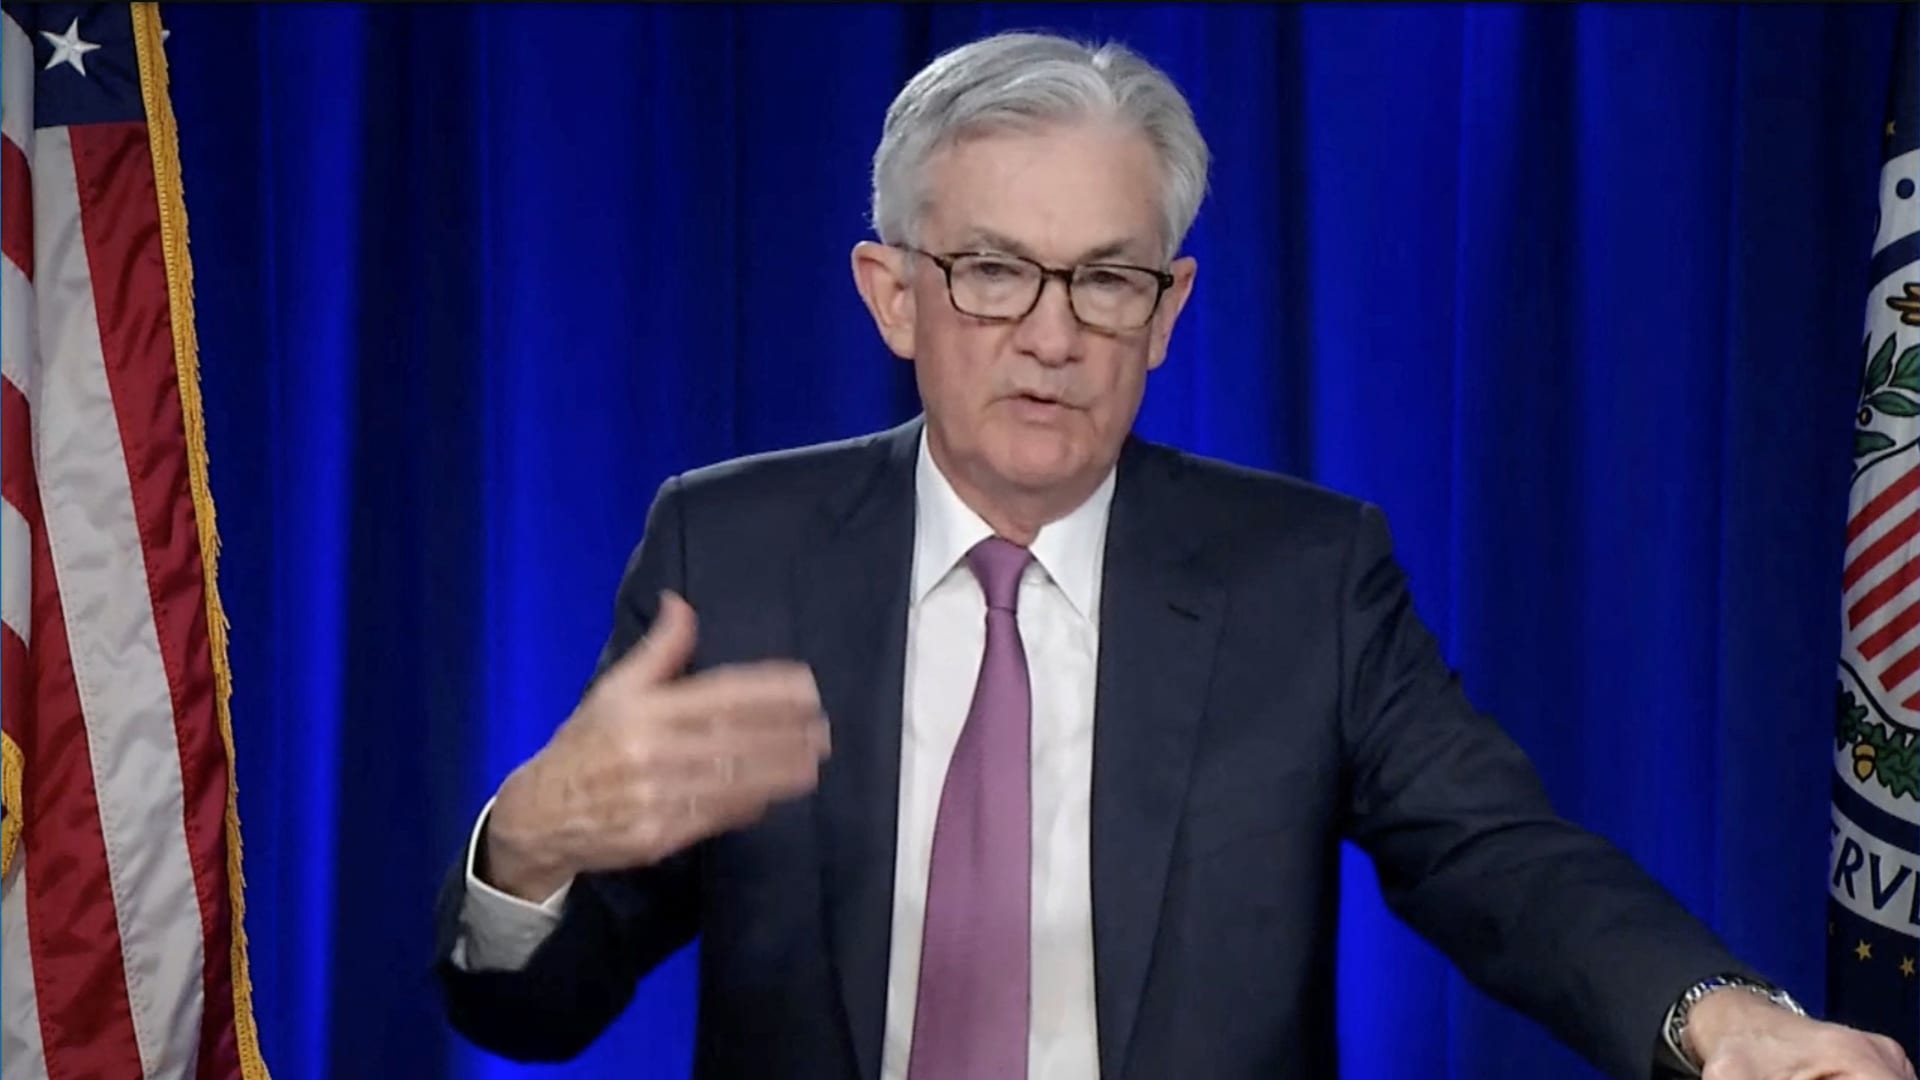 Powell says ‘inflation is much too high’ and the Fed will take ‘necessary steps’ to address – CNBC